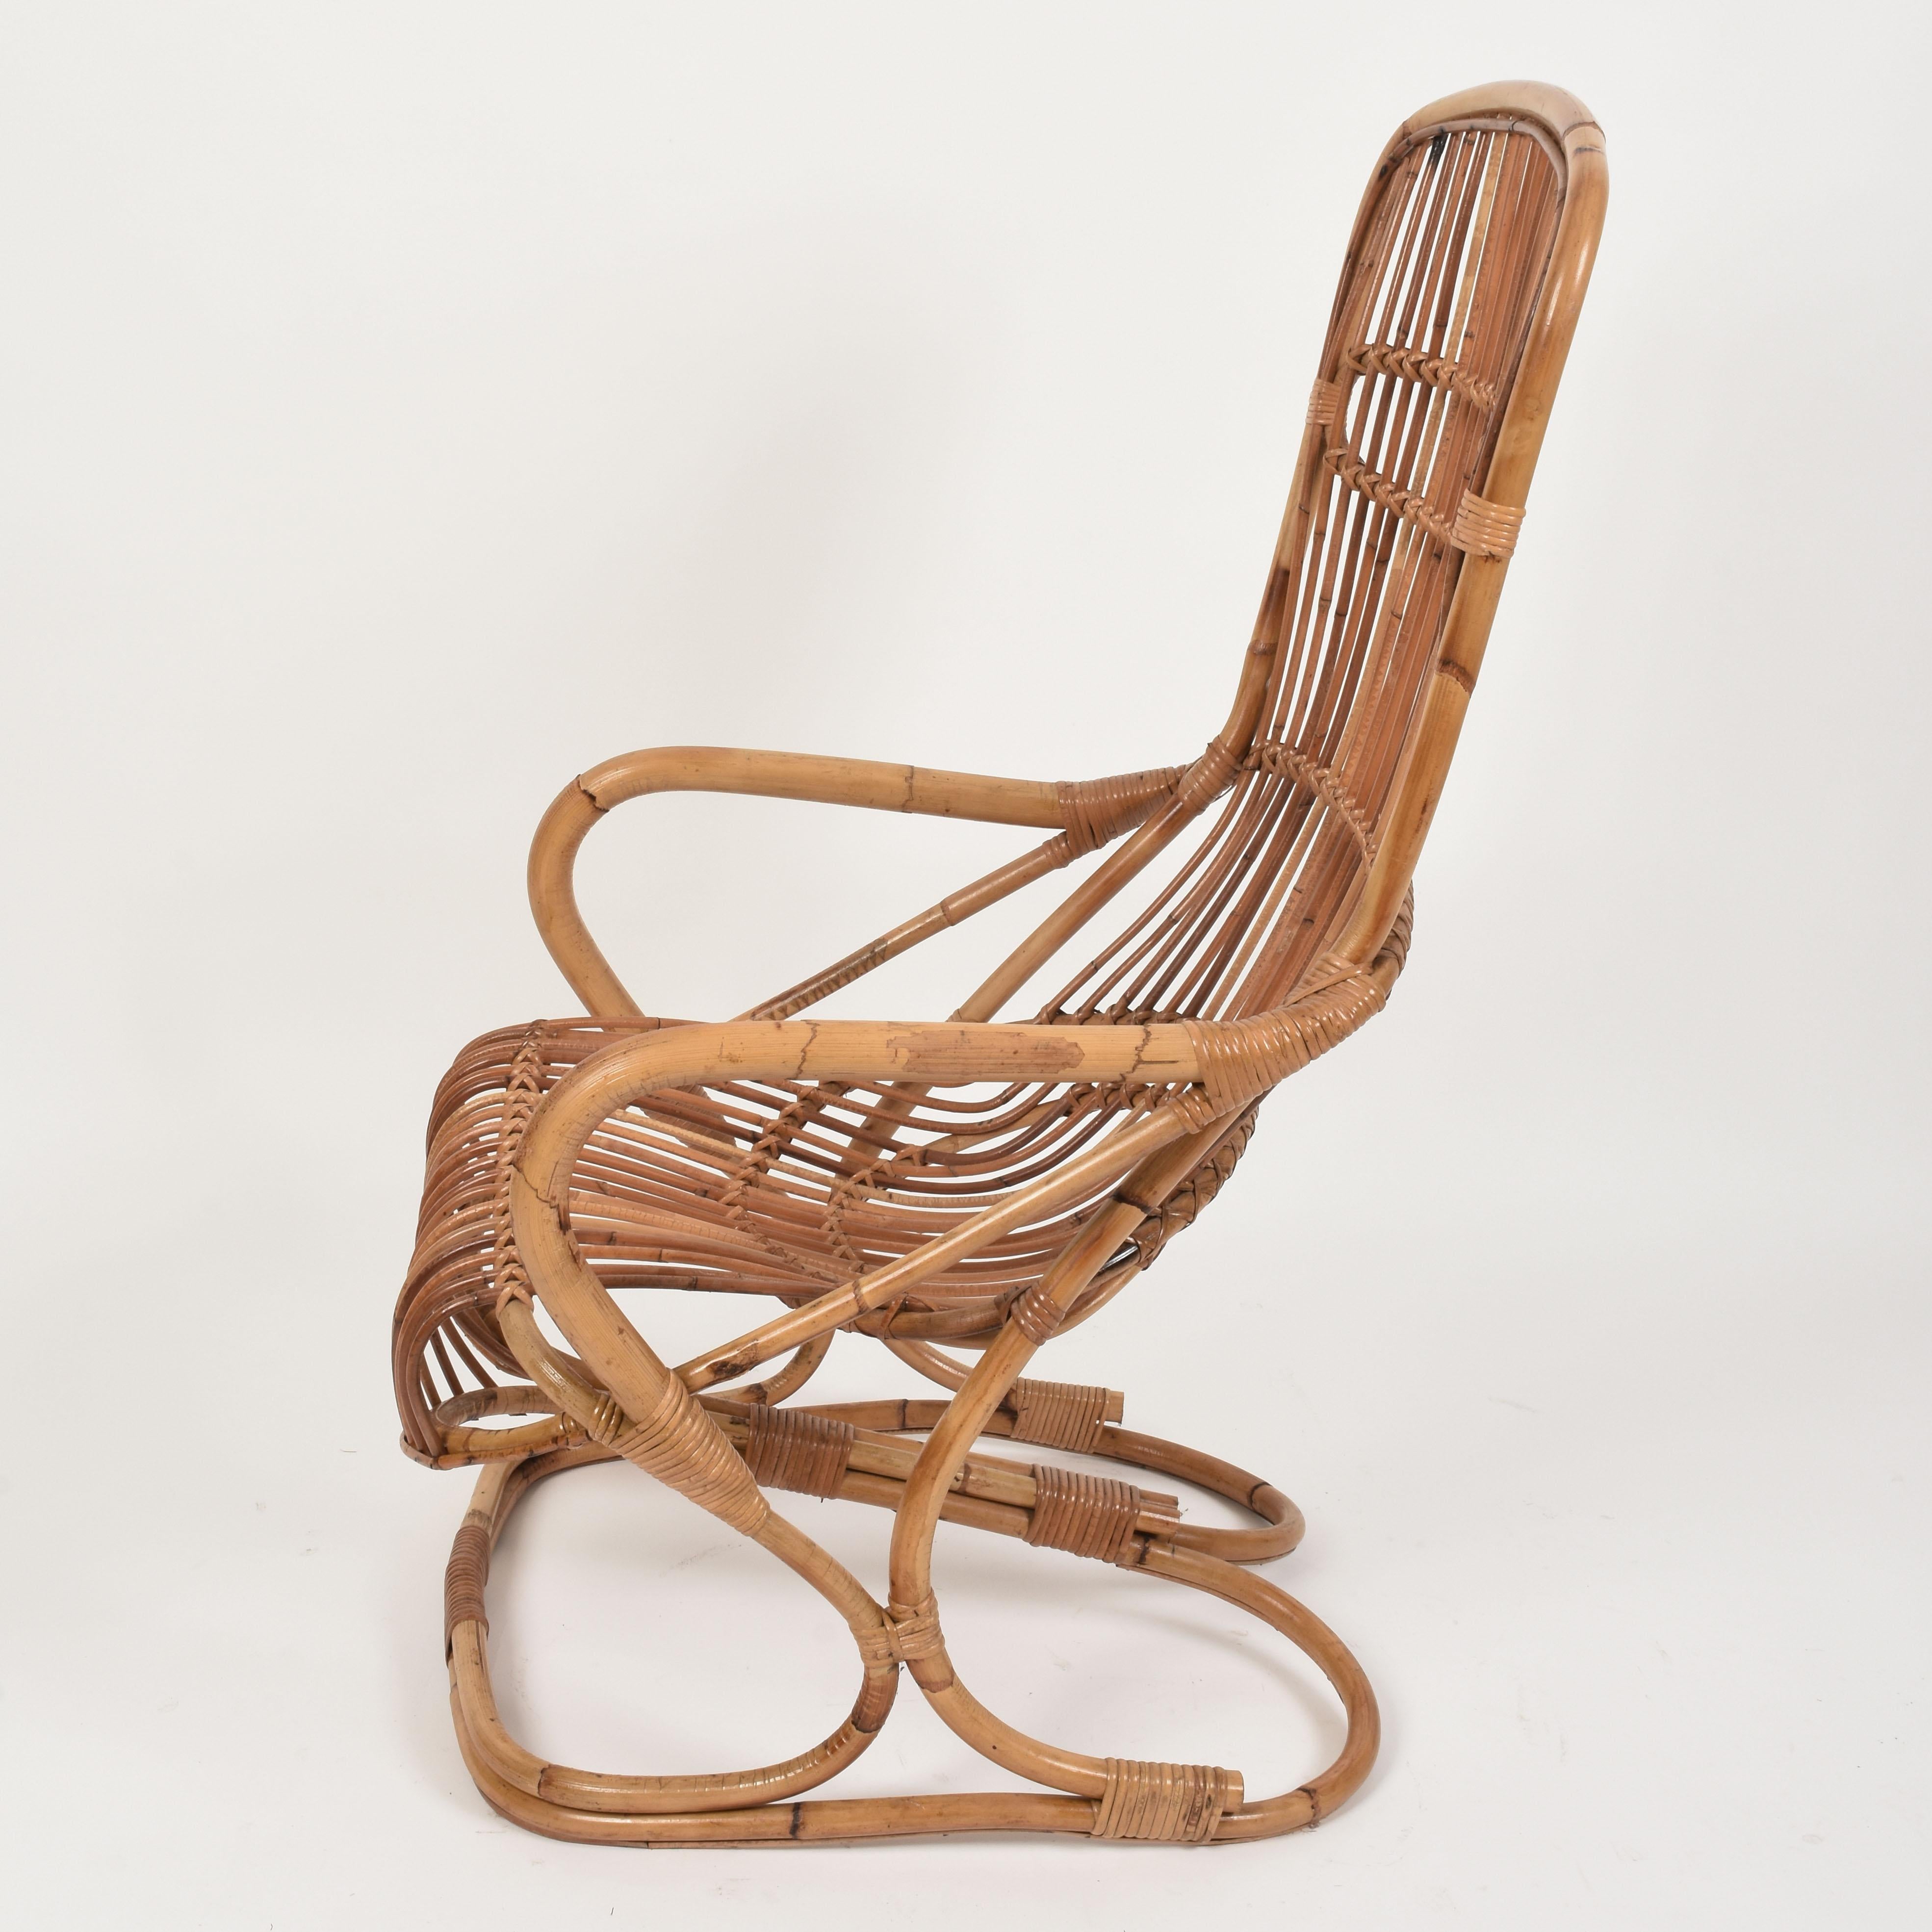 Midcentury rattan and bamboo armchair. This item was produced in Italy during 1960s.

The seat is made of thin rattan elements while the structural elements are made of bamboo with a rectangular bamboo base, giving a 1960s design twist to the